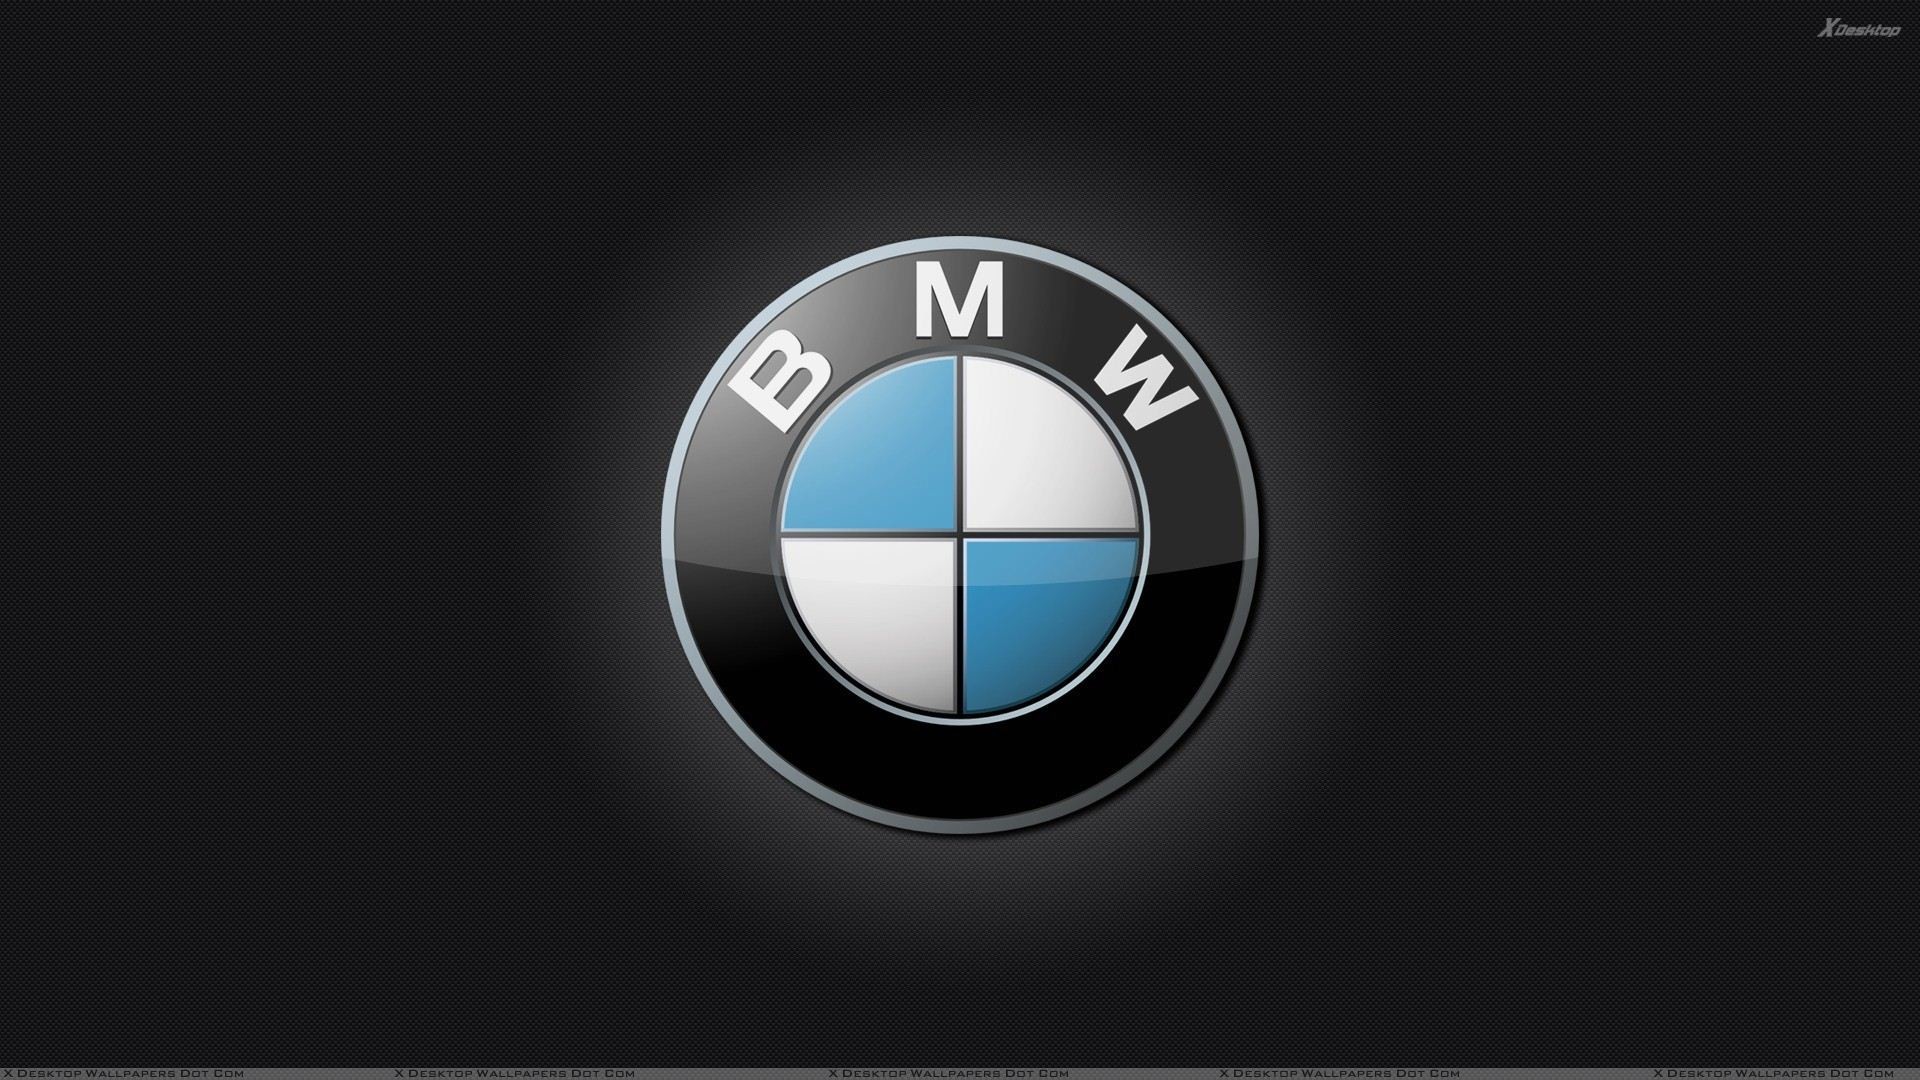 1920x1080 Search Results for “bmw logo wallpaper desktop” – Adorable Wallpapers